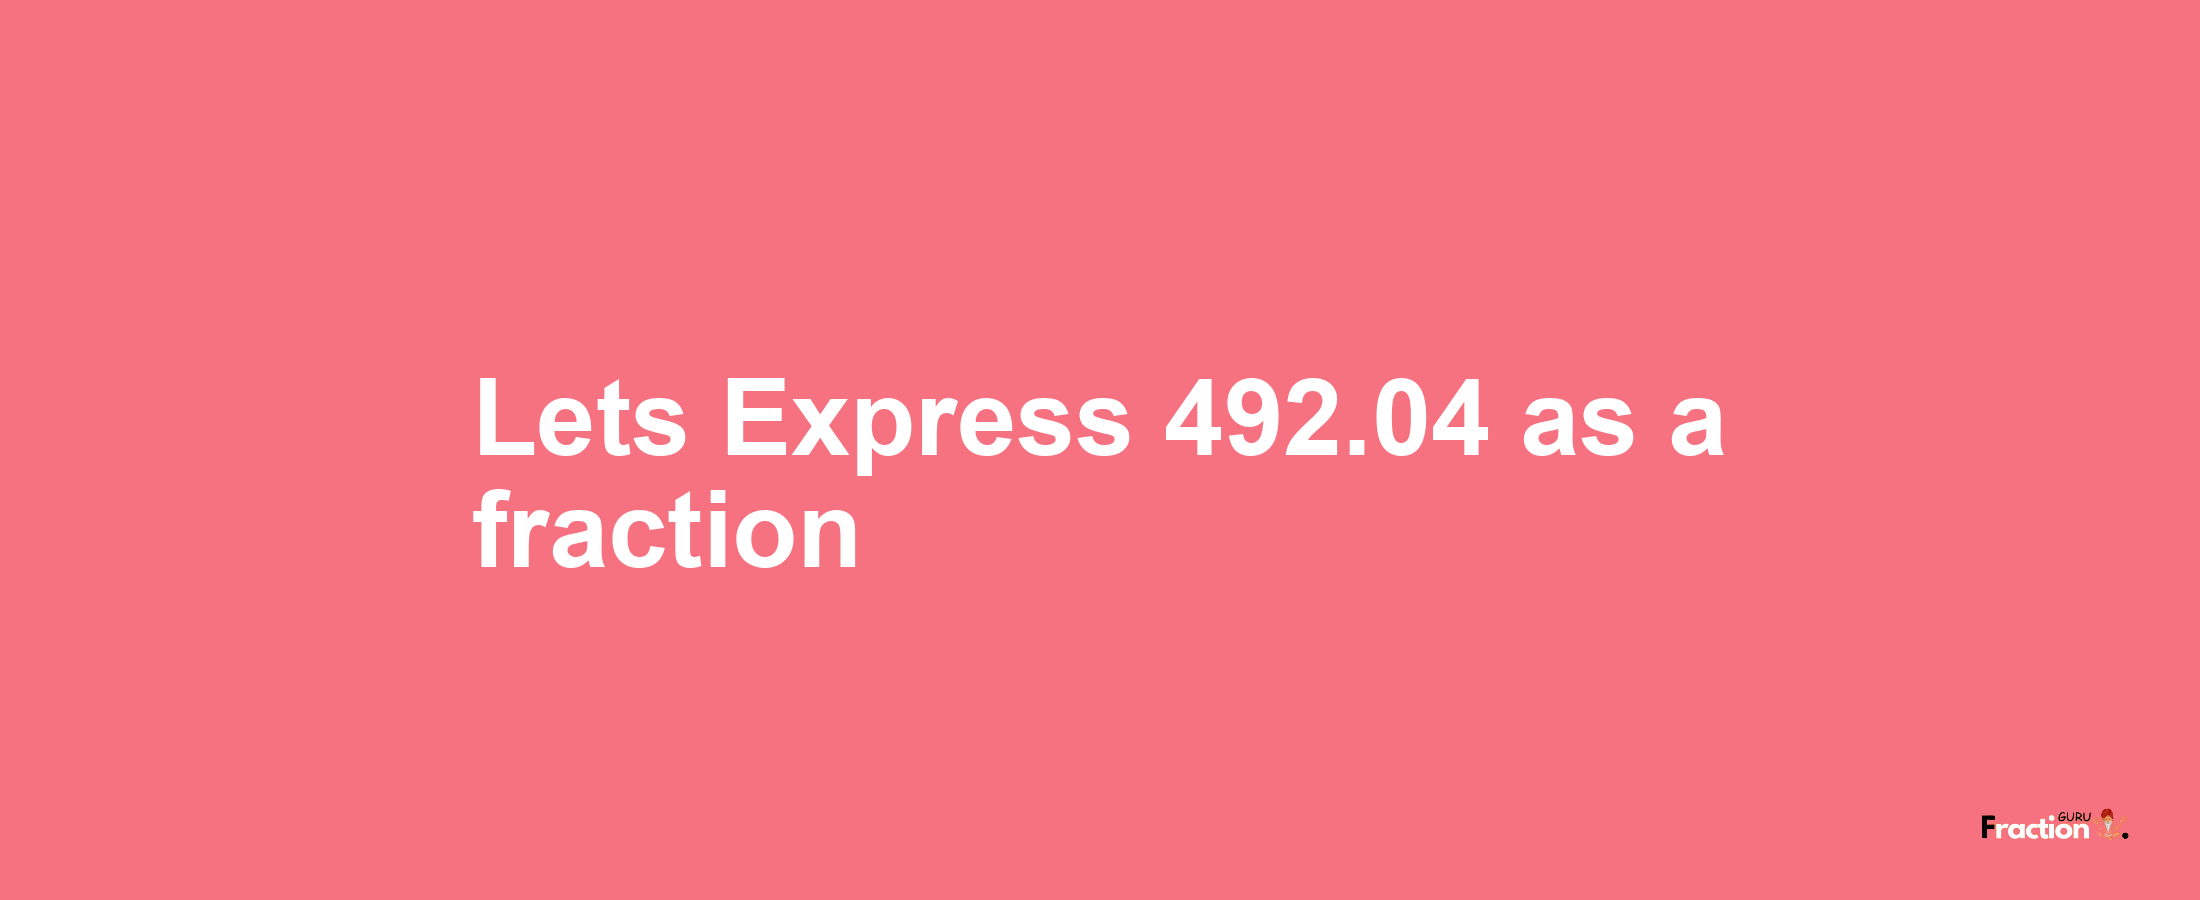 Lets Express 492.04 as afraction